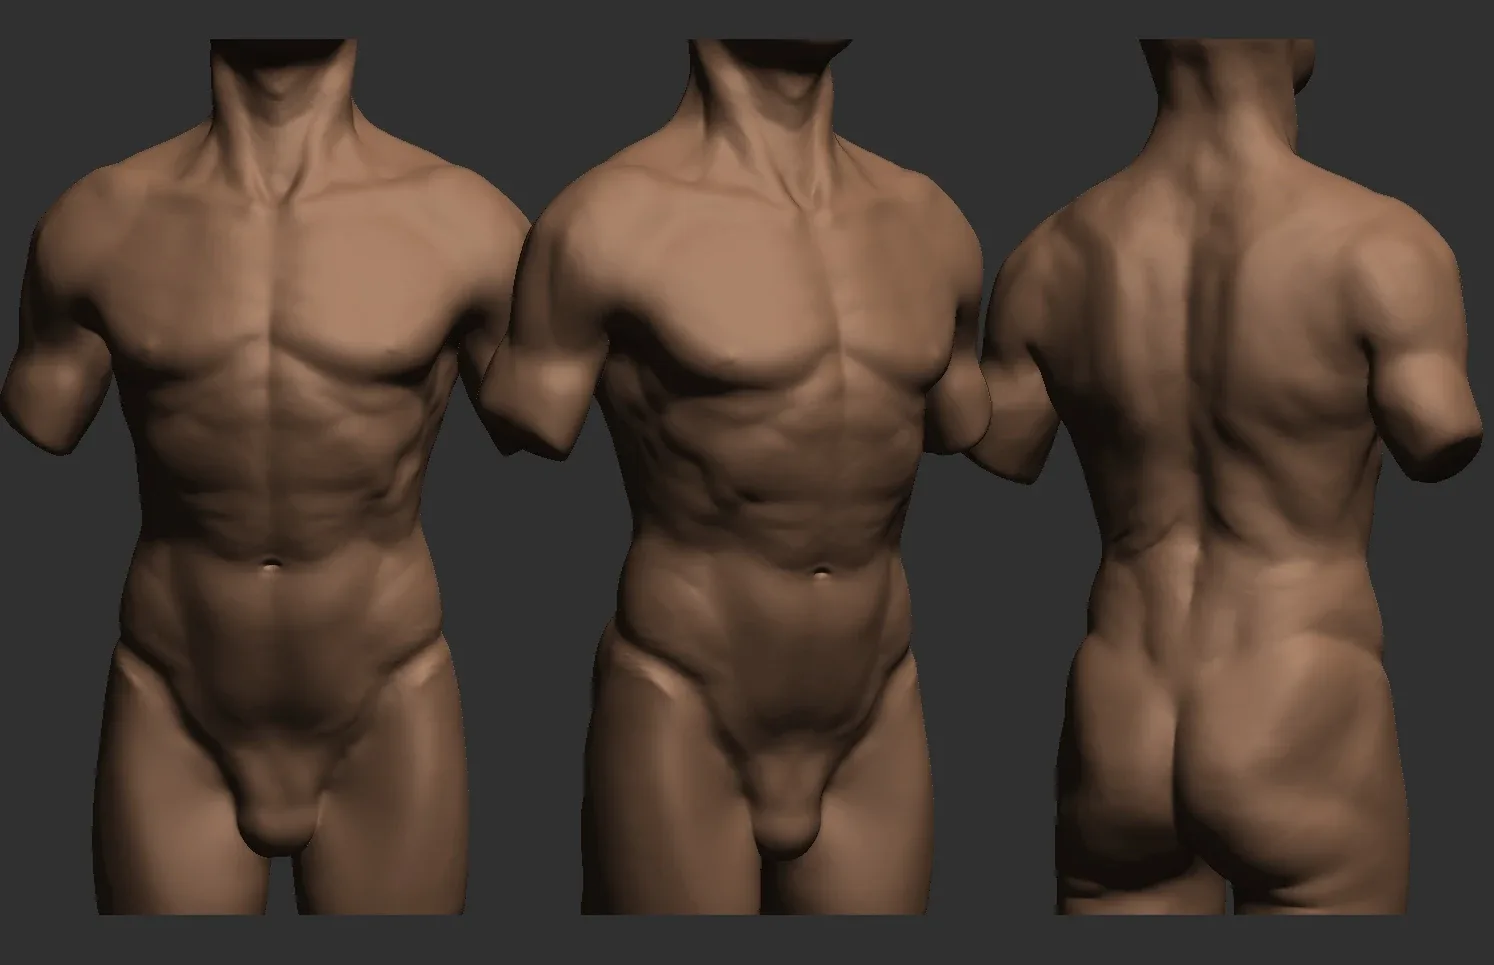 Realistic torso reference- includes stl file ready to print